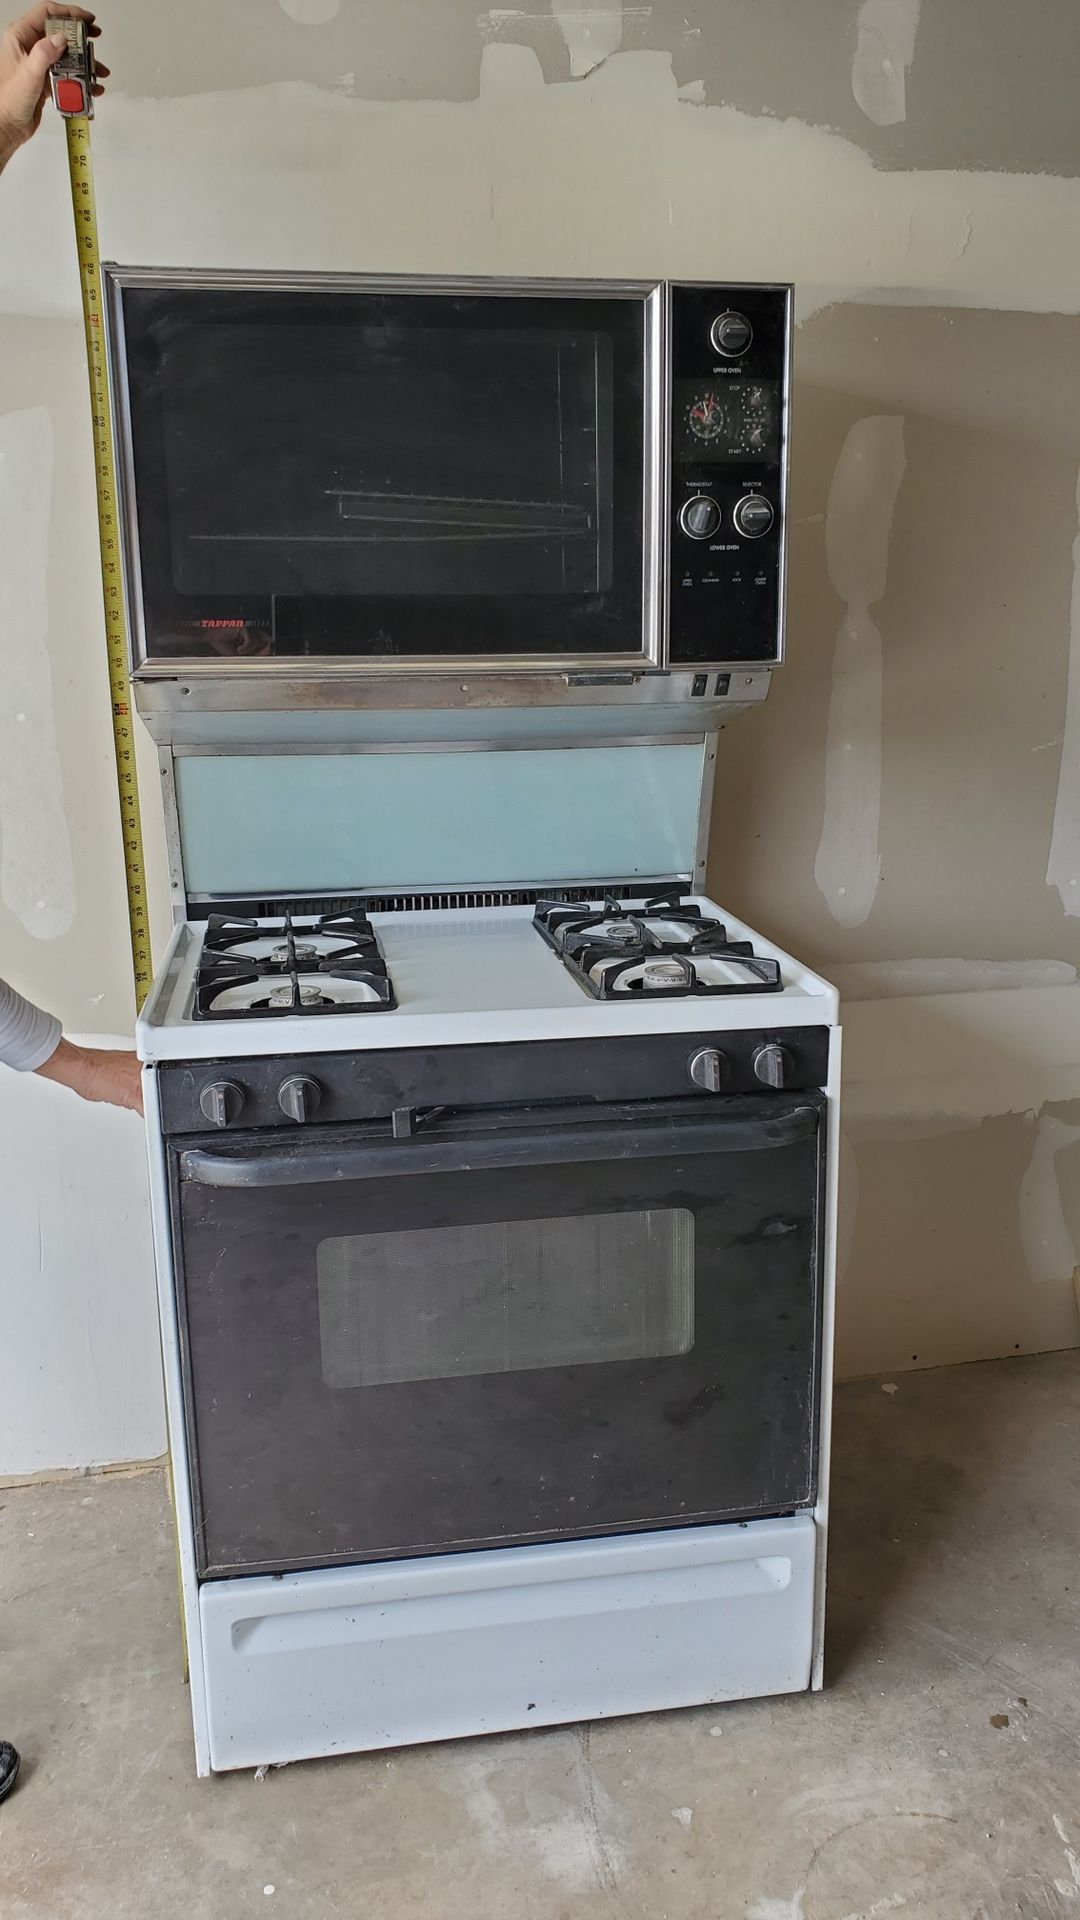 FREE!! Need it gone. Working Tappan gas with double oven 66” tall x 30” wide x 28” deep.